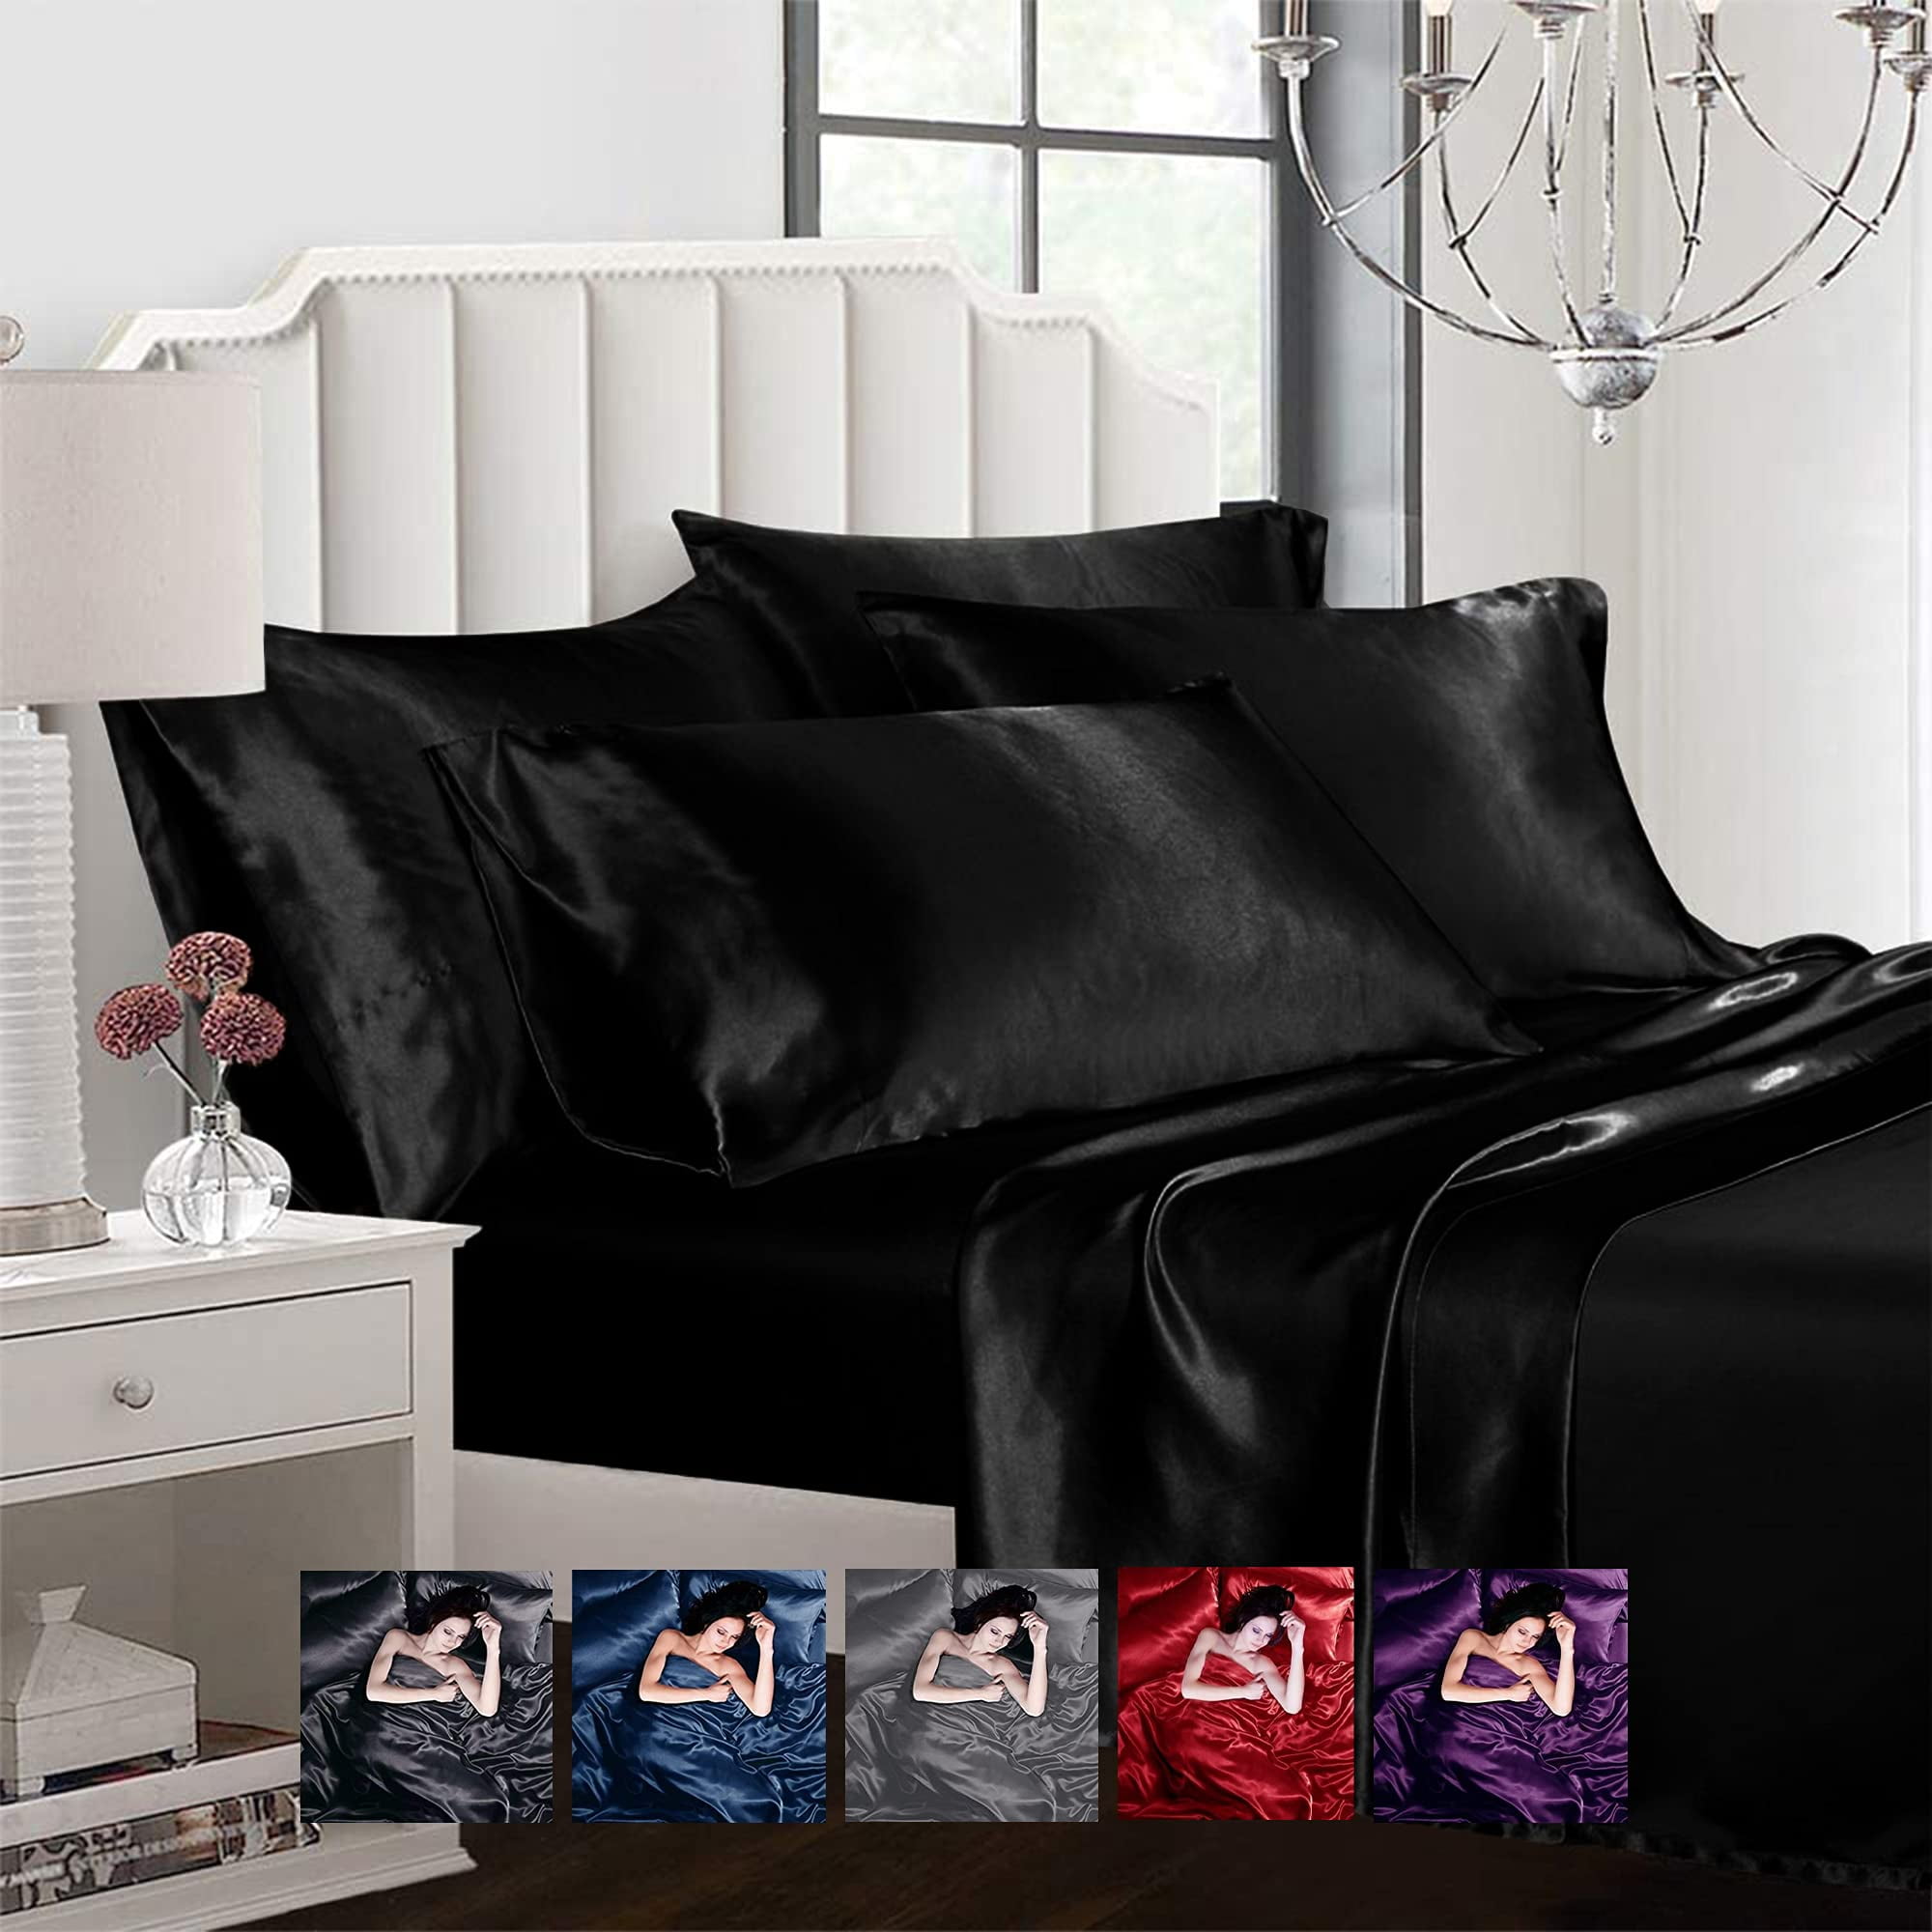 1X New Home Silk Satin Duvet Cover Silky Bedding Set Fitted Sheet Pillow Cases 